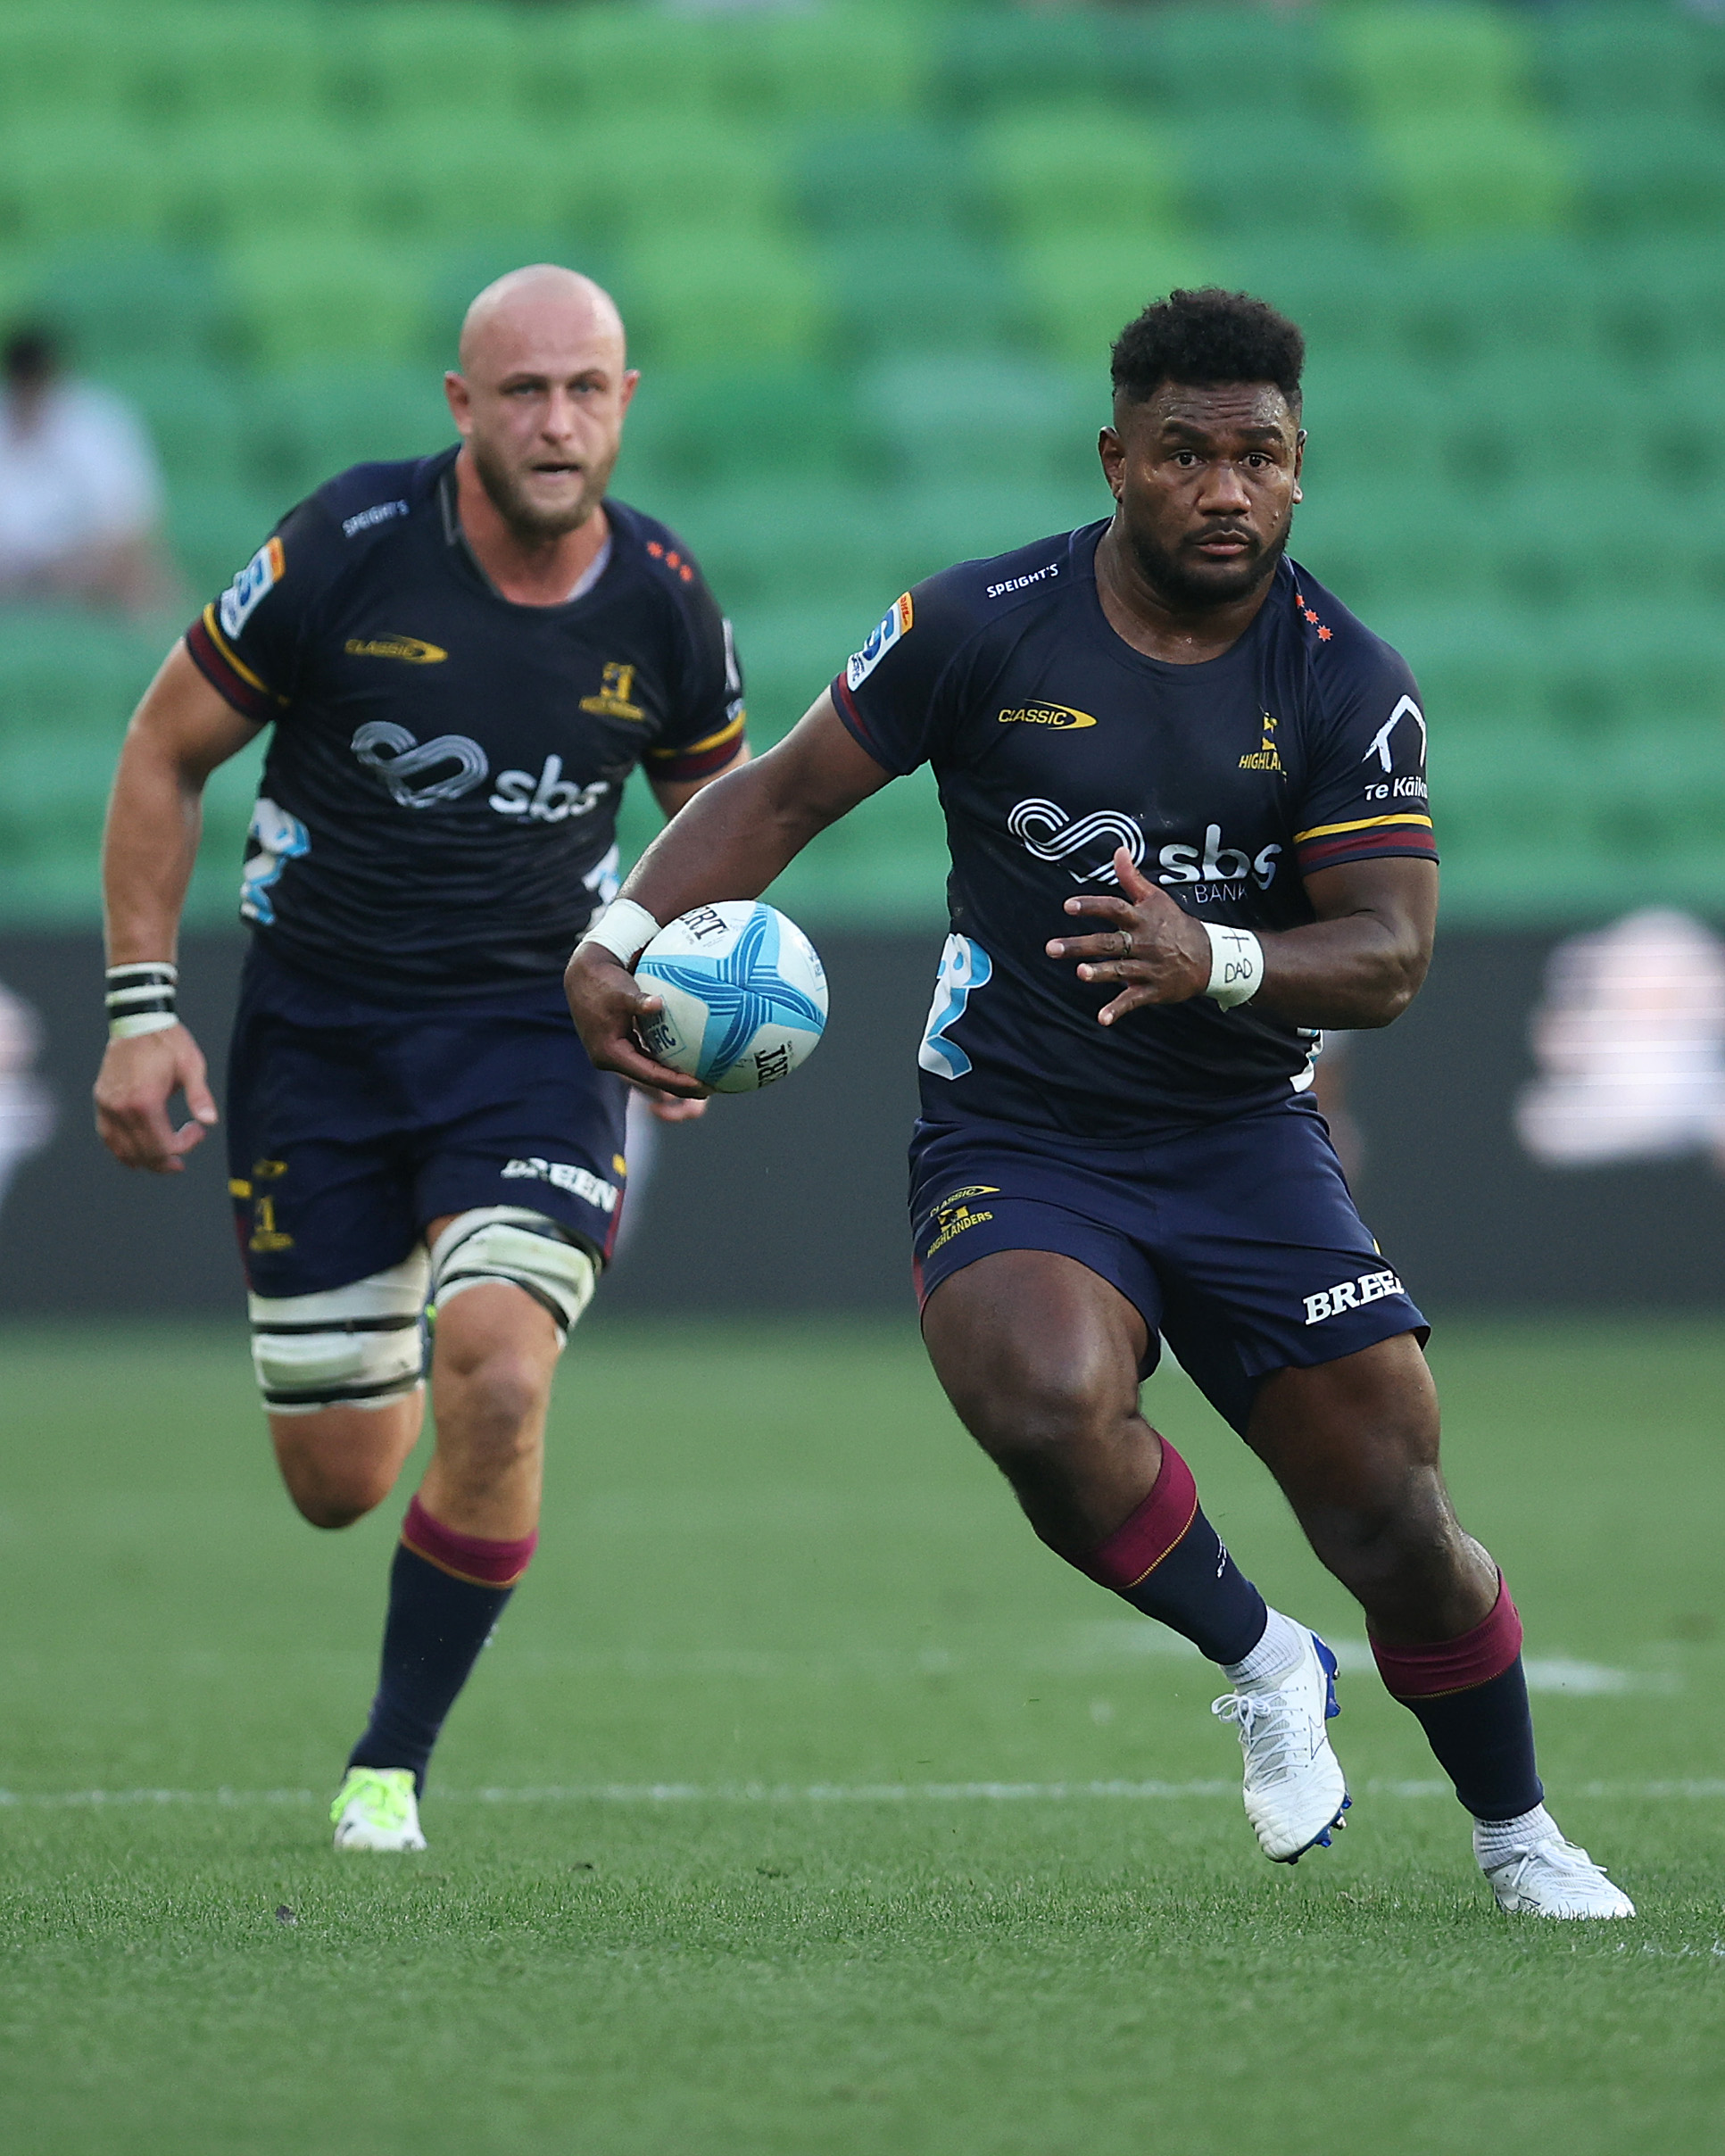 Highlanders winger Timoci Tavatavanawai charges upfield with No 8 Hugh Renton in support during...